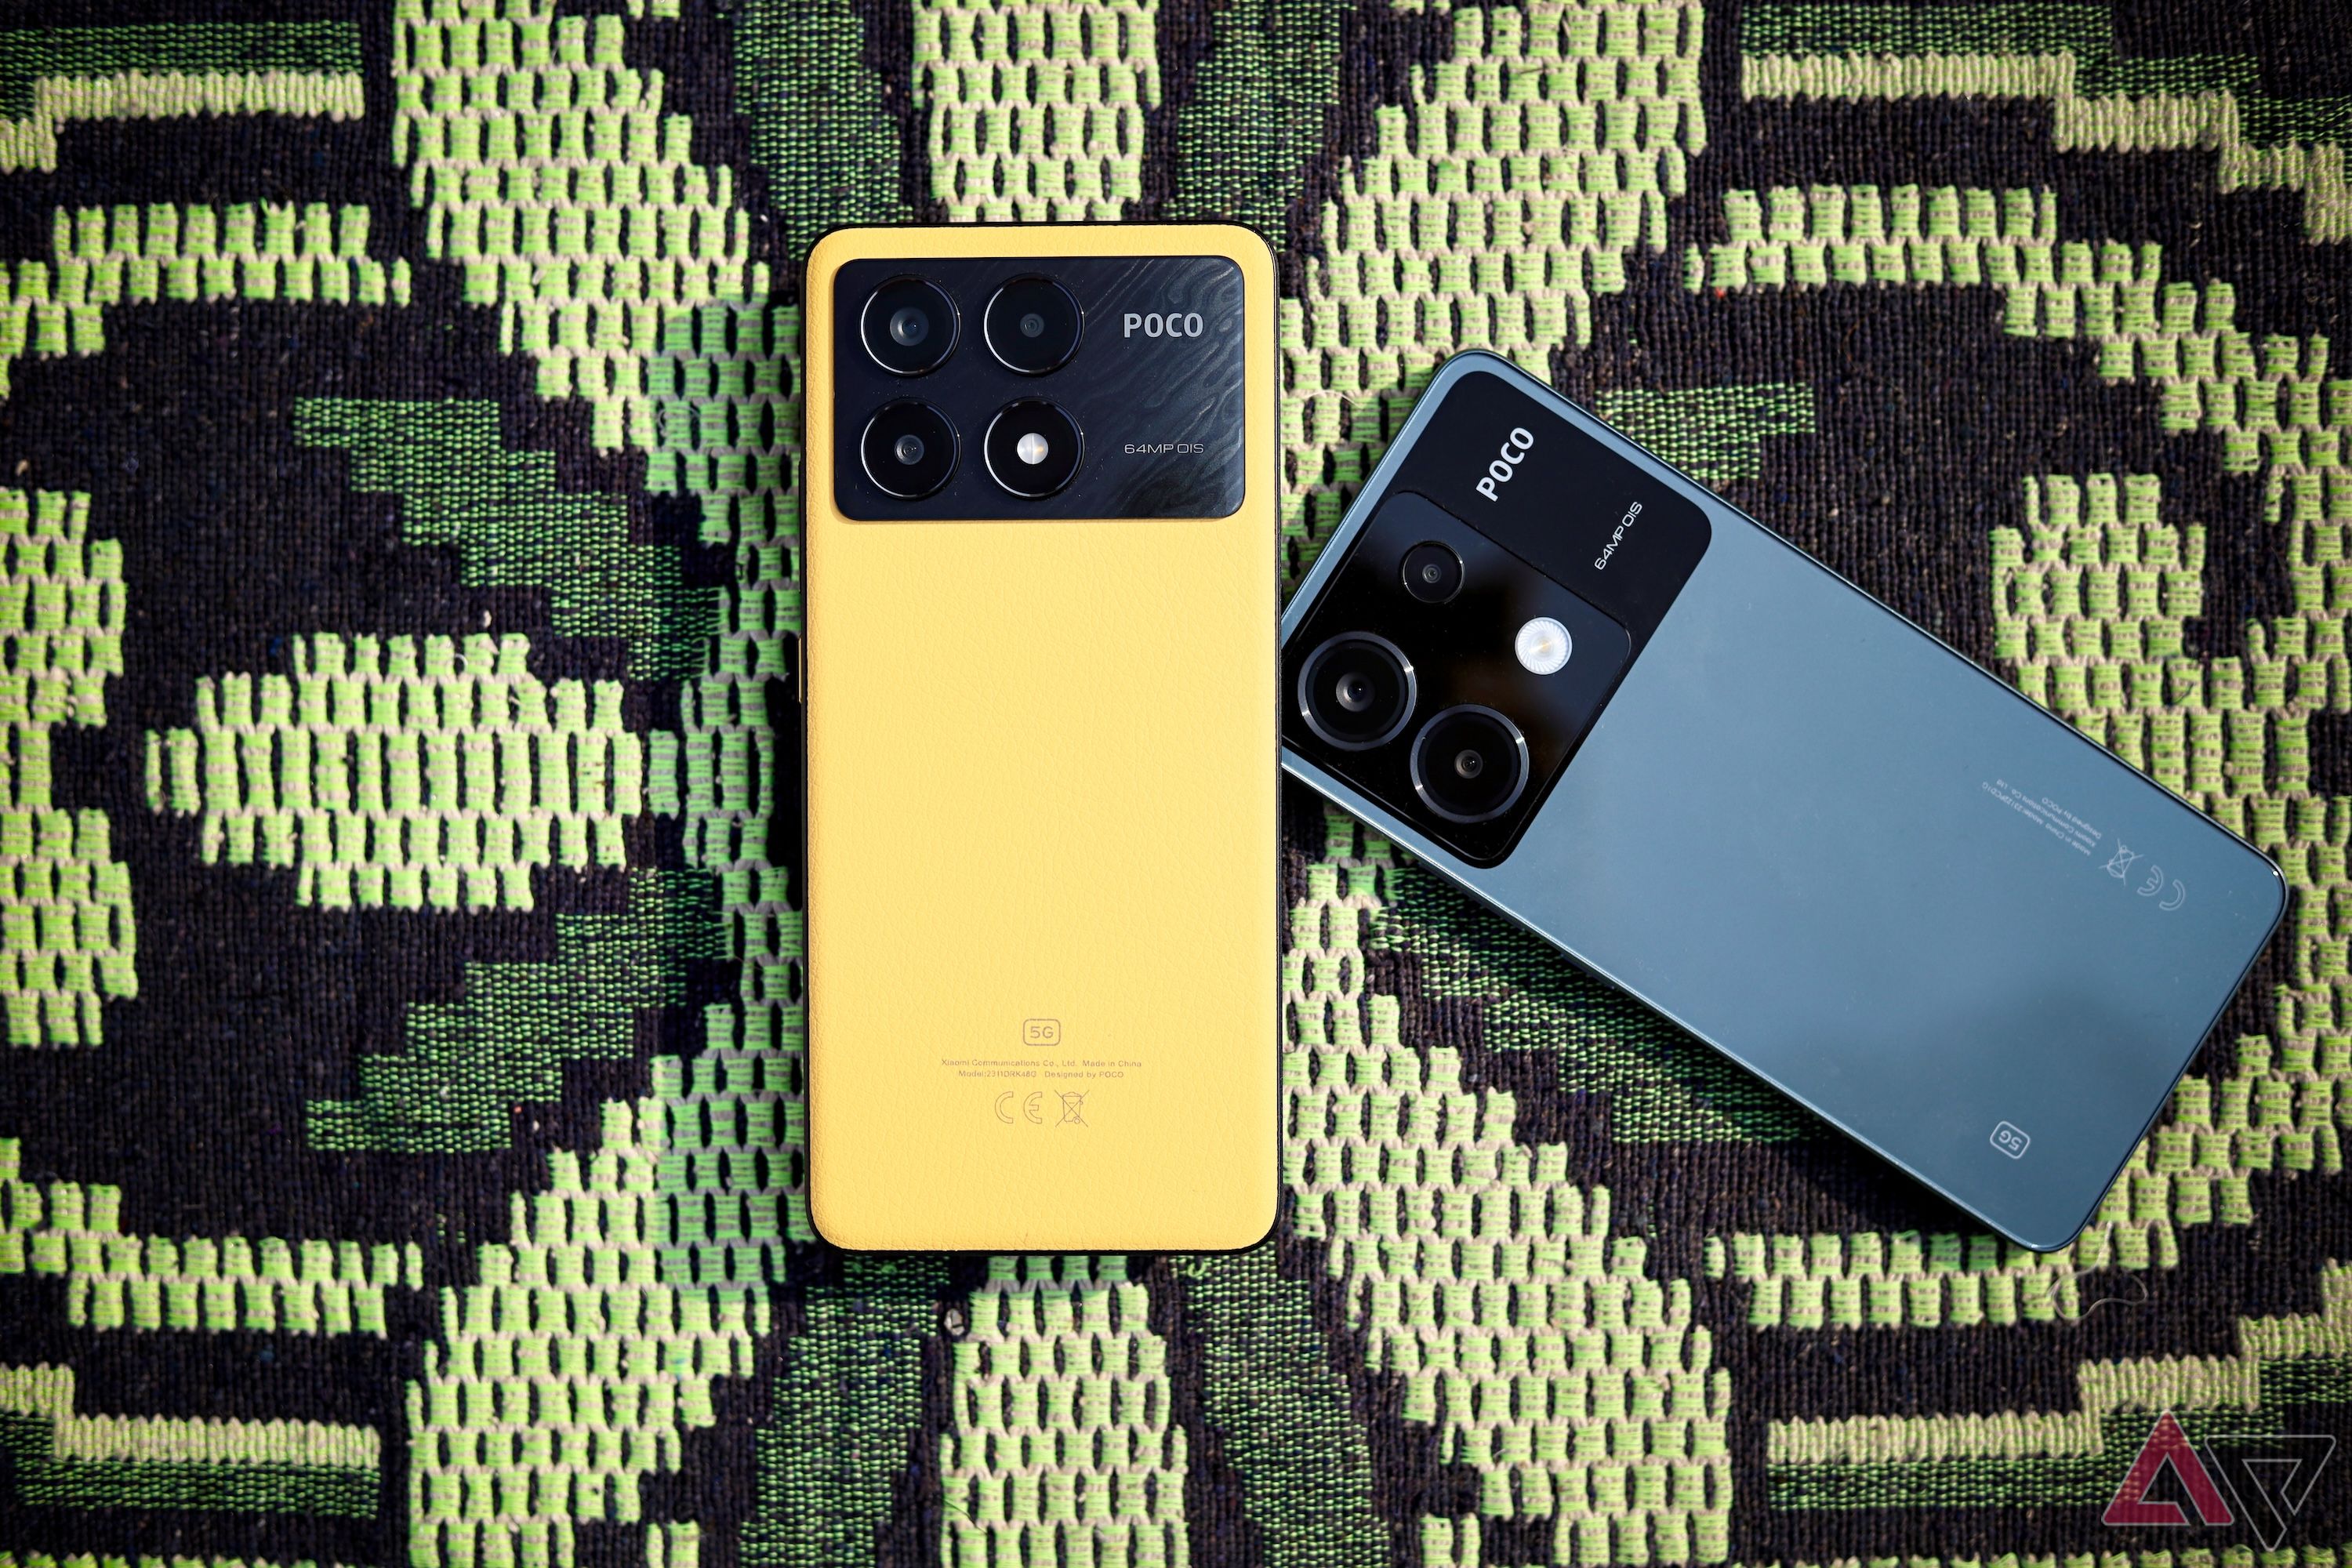 Poco launches X6 series in India: Check pricing, key specs, and launch  offers – India TV